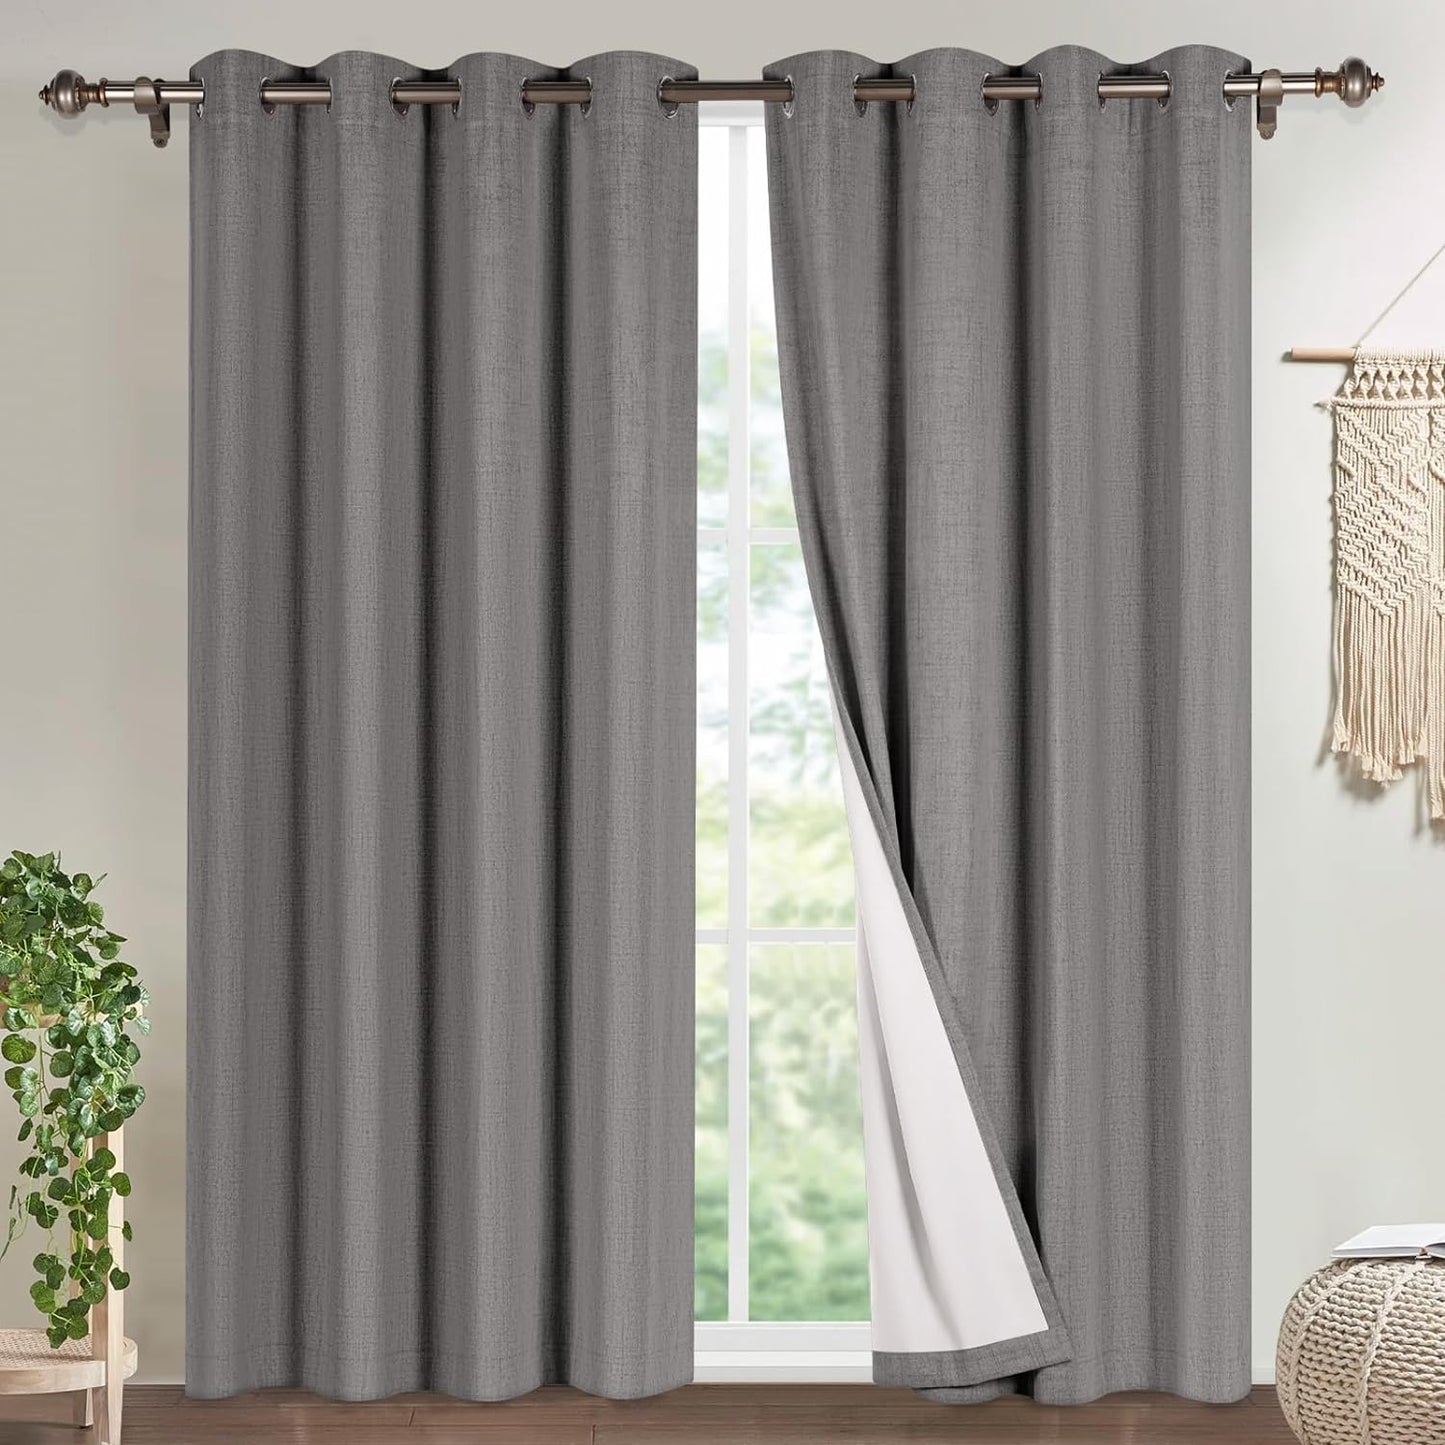 Timeles 100% Blackout Window Curtains 84 Inch Length for Living Room Textured Linen Curtains Sliver Grommet Pinch Pleated Room Darkening Curtain with White Liner/Ties(2 Panel W52 X L84, Ivory)  Timeles Grey W52" X L96" 